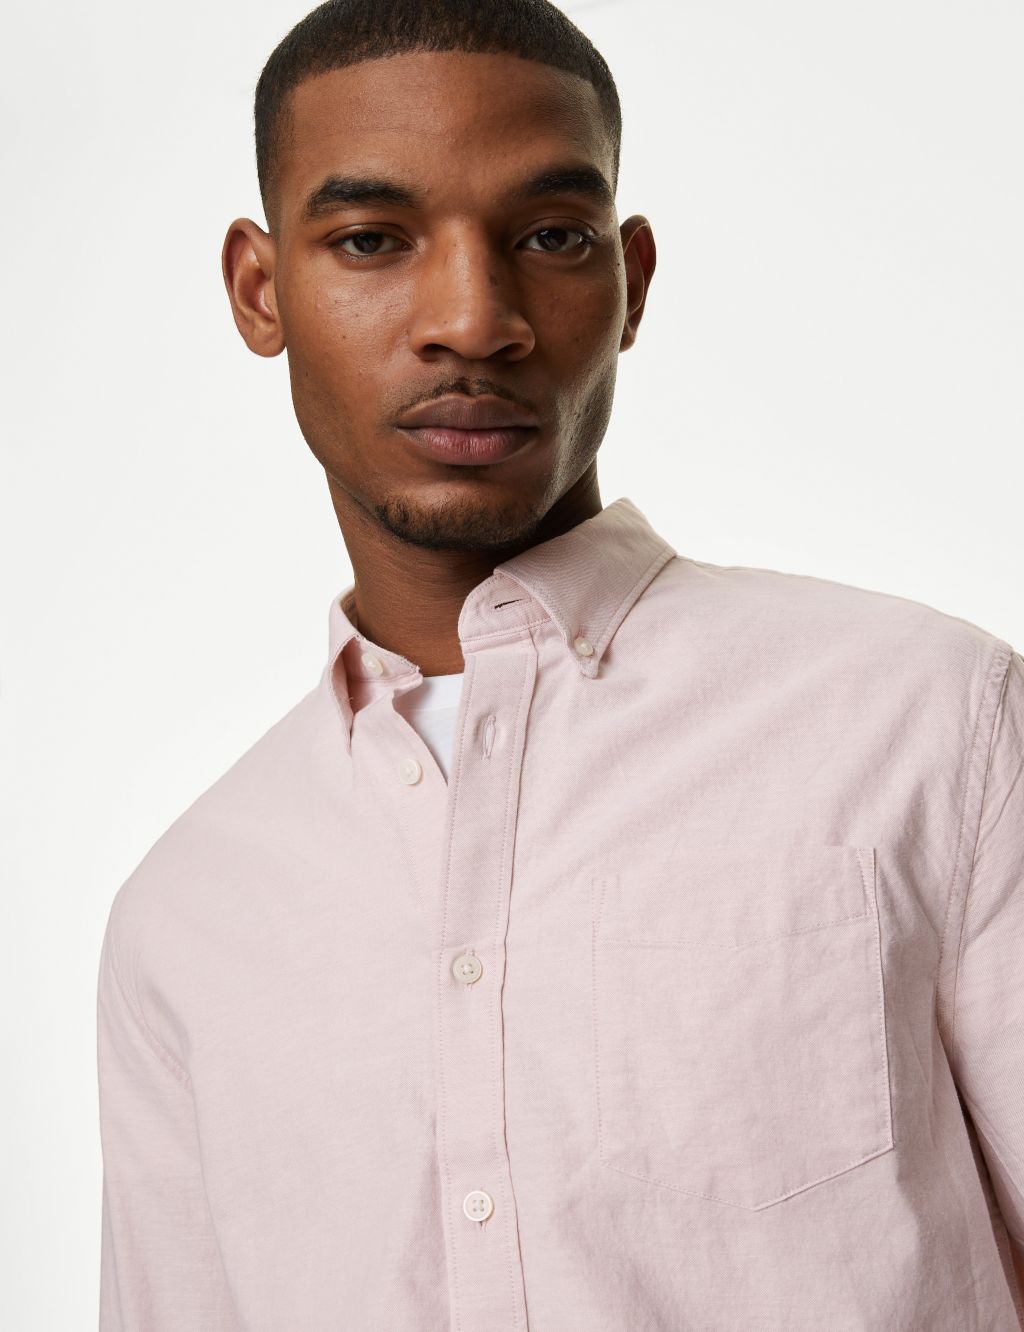 Men's pink shirt with blue and pink printed pattern lining (Double